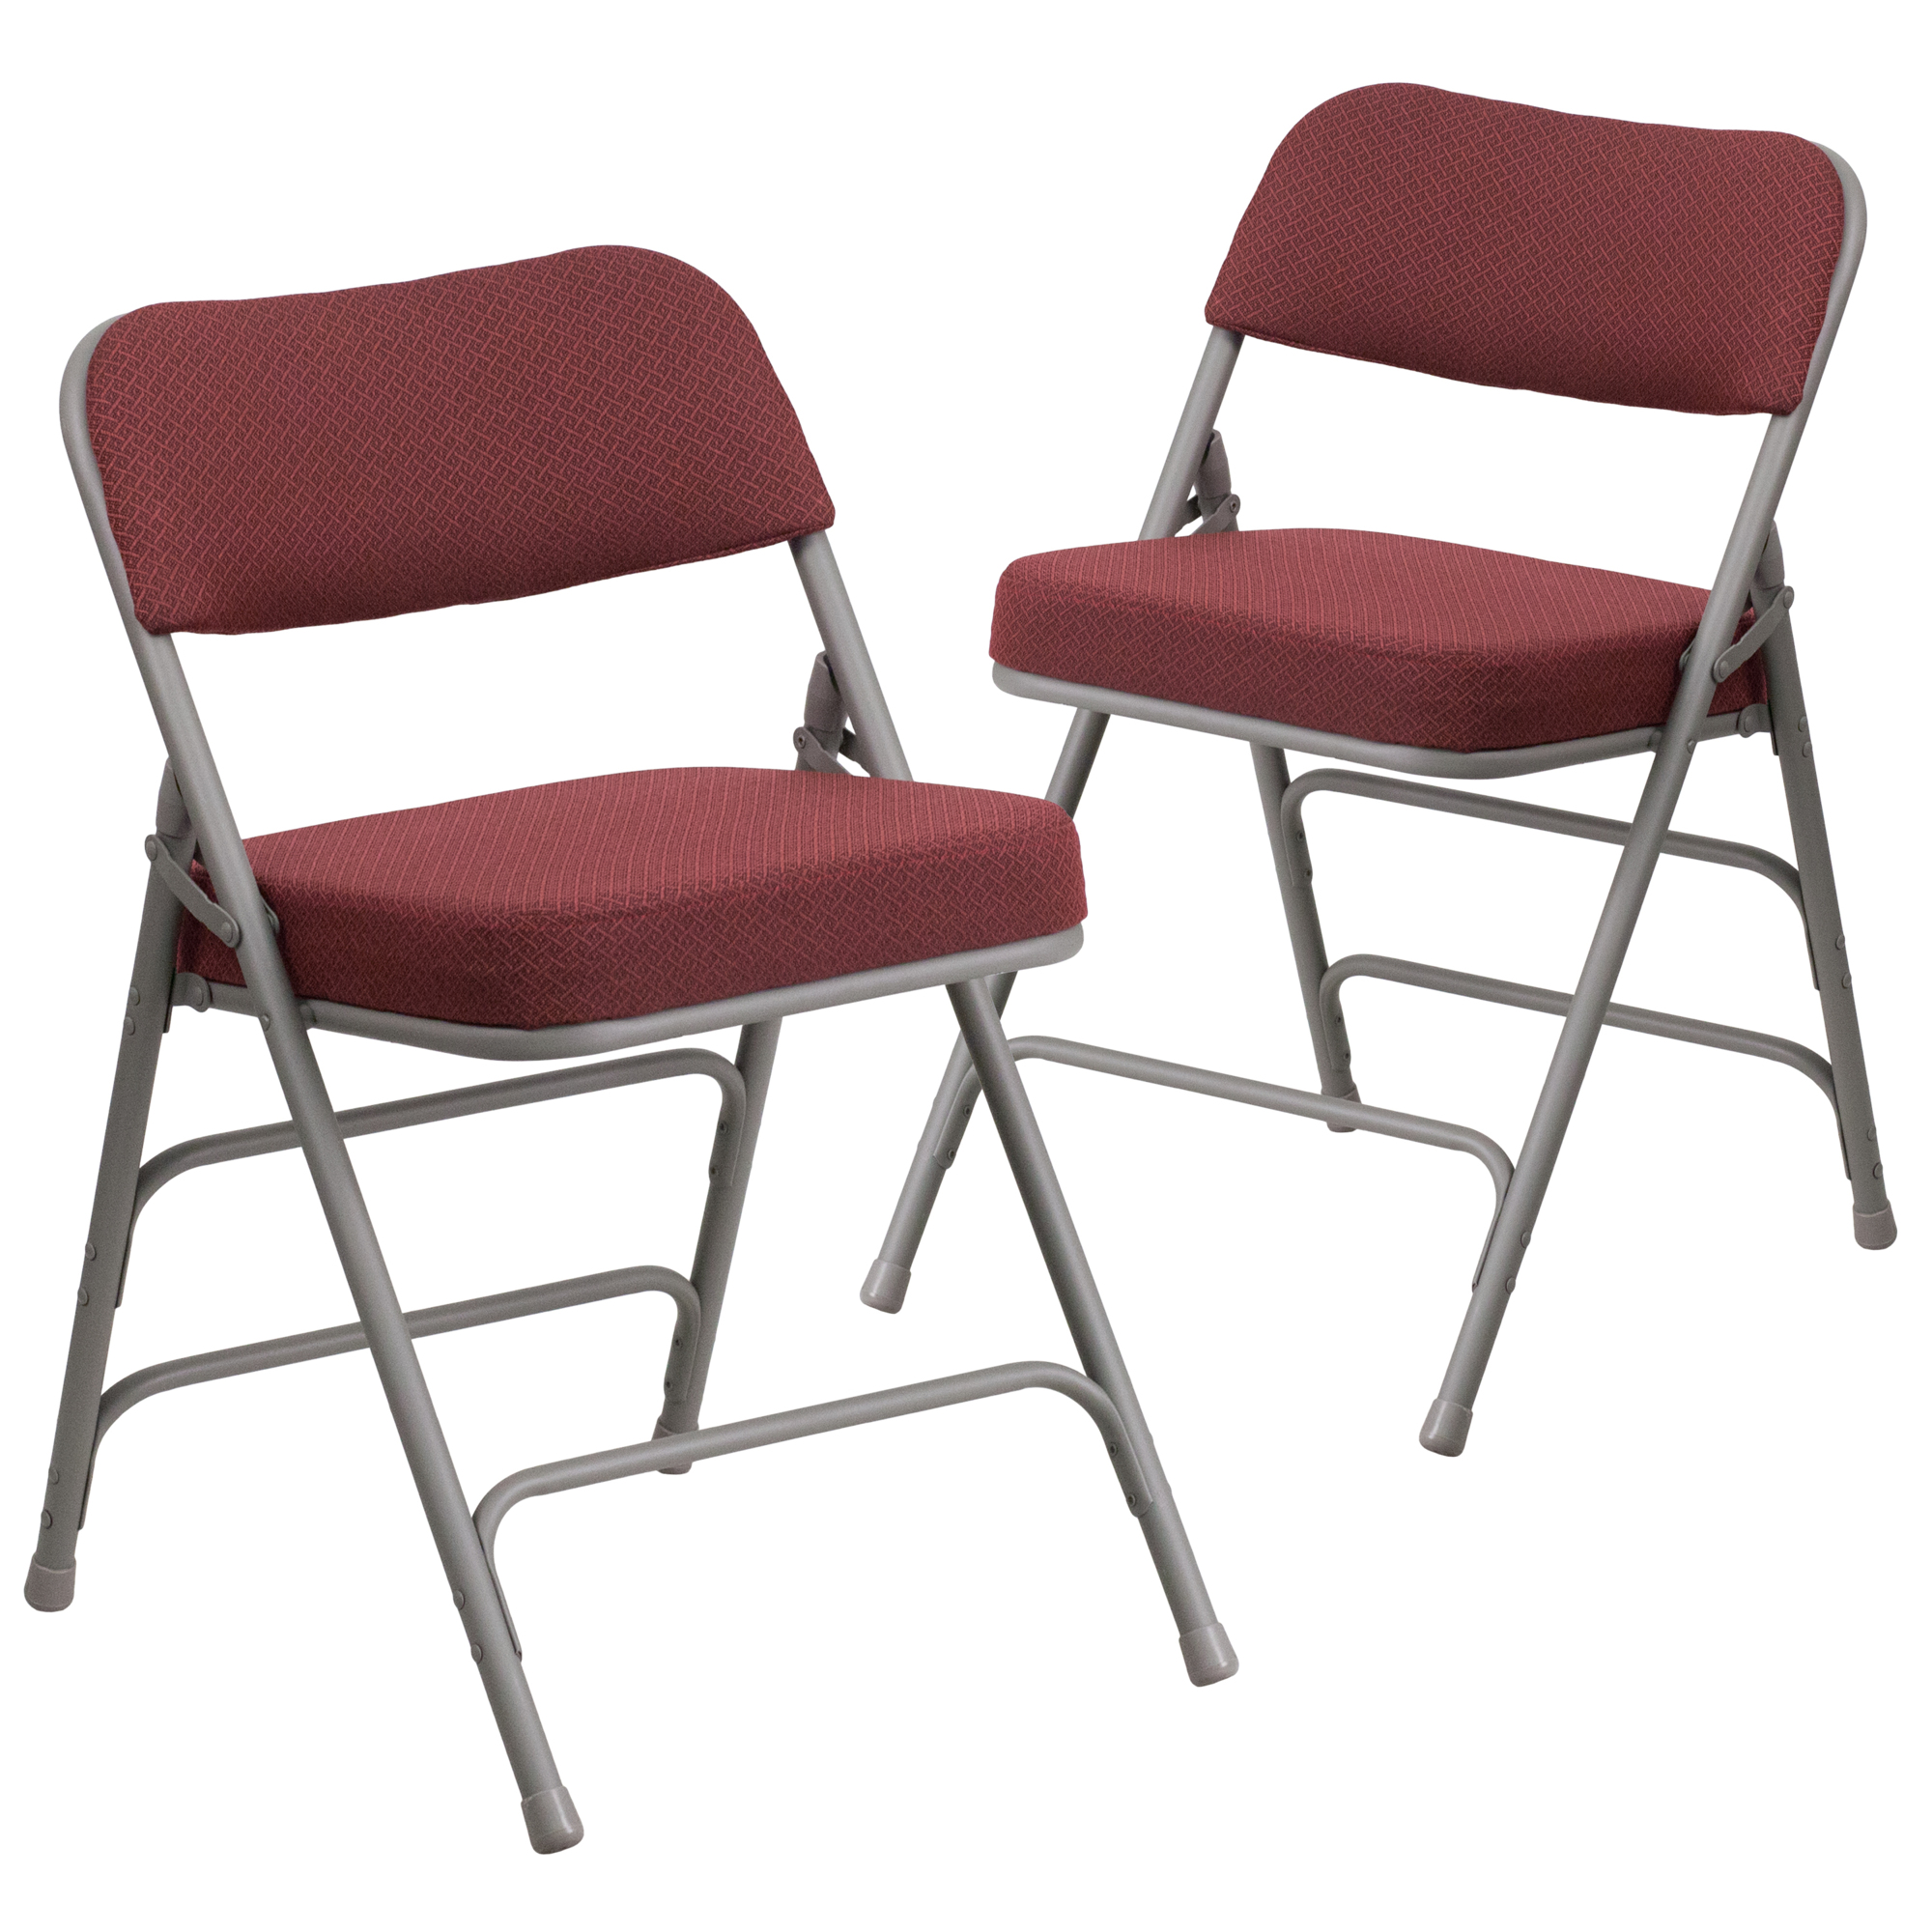 Flash Furniture, 2 Pack 18Inch W Burgundy Fabric Metal Folding Chair, Primary Color Burgundy, Included (qty.) 2, Model 2AWMC320AFBG